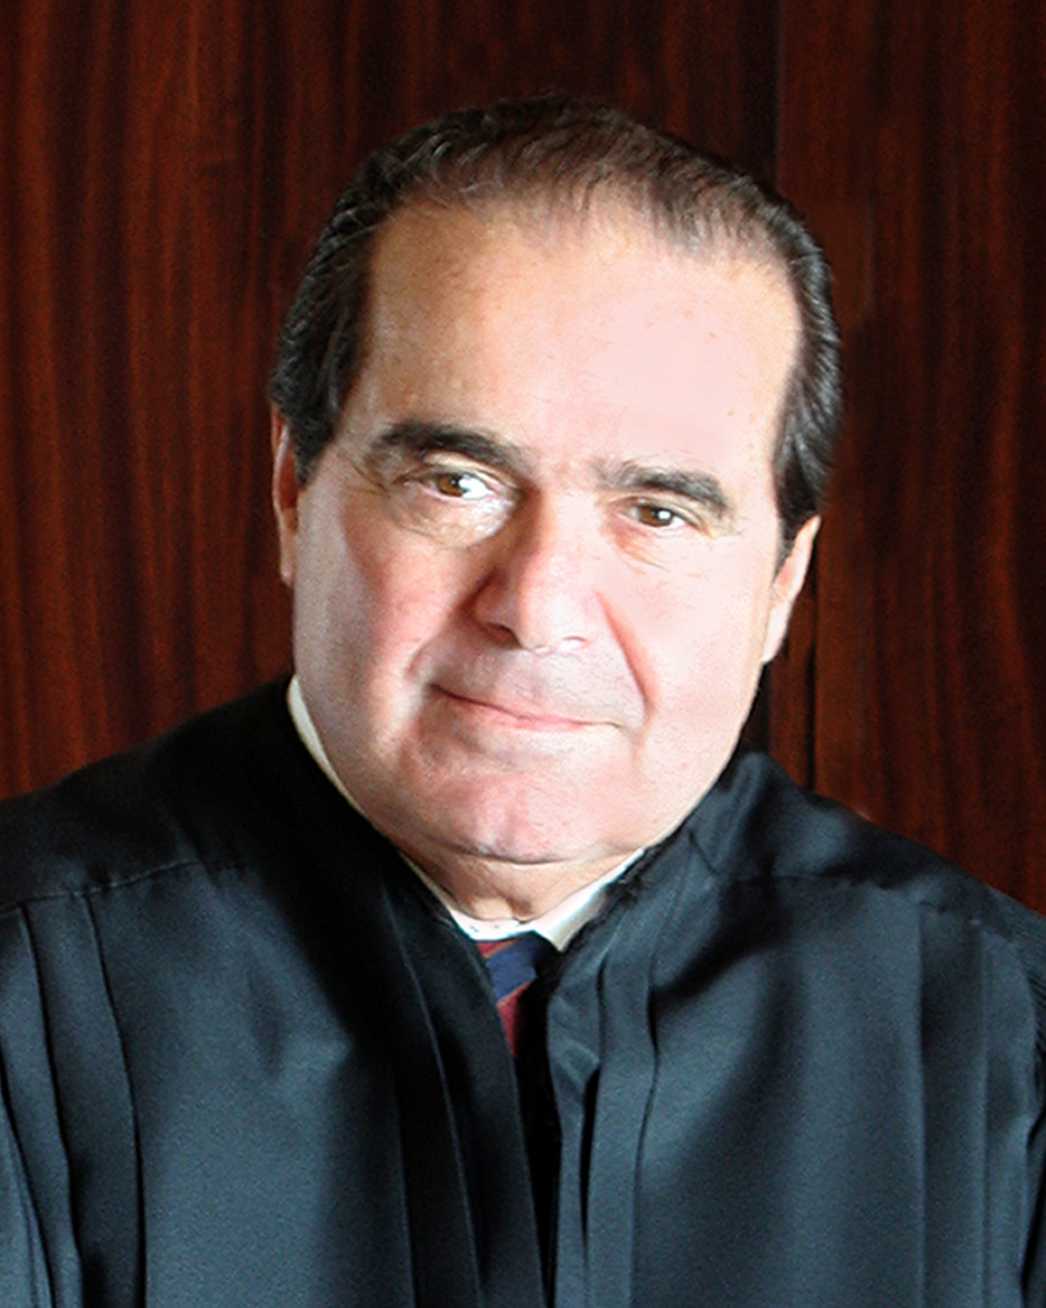 Antonin Scalia, Associate Justice of the Supreme Court of the United States